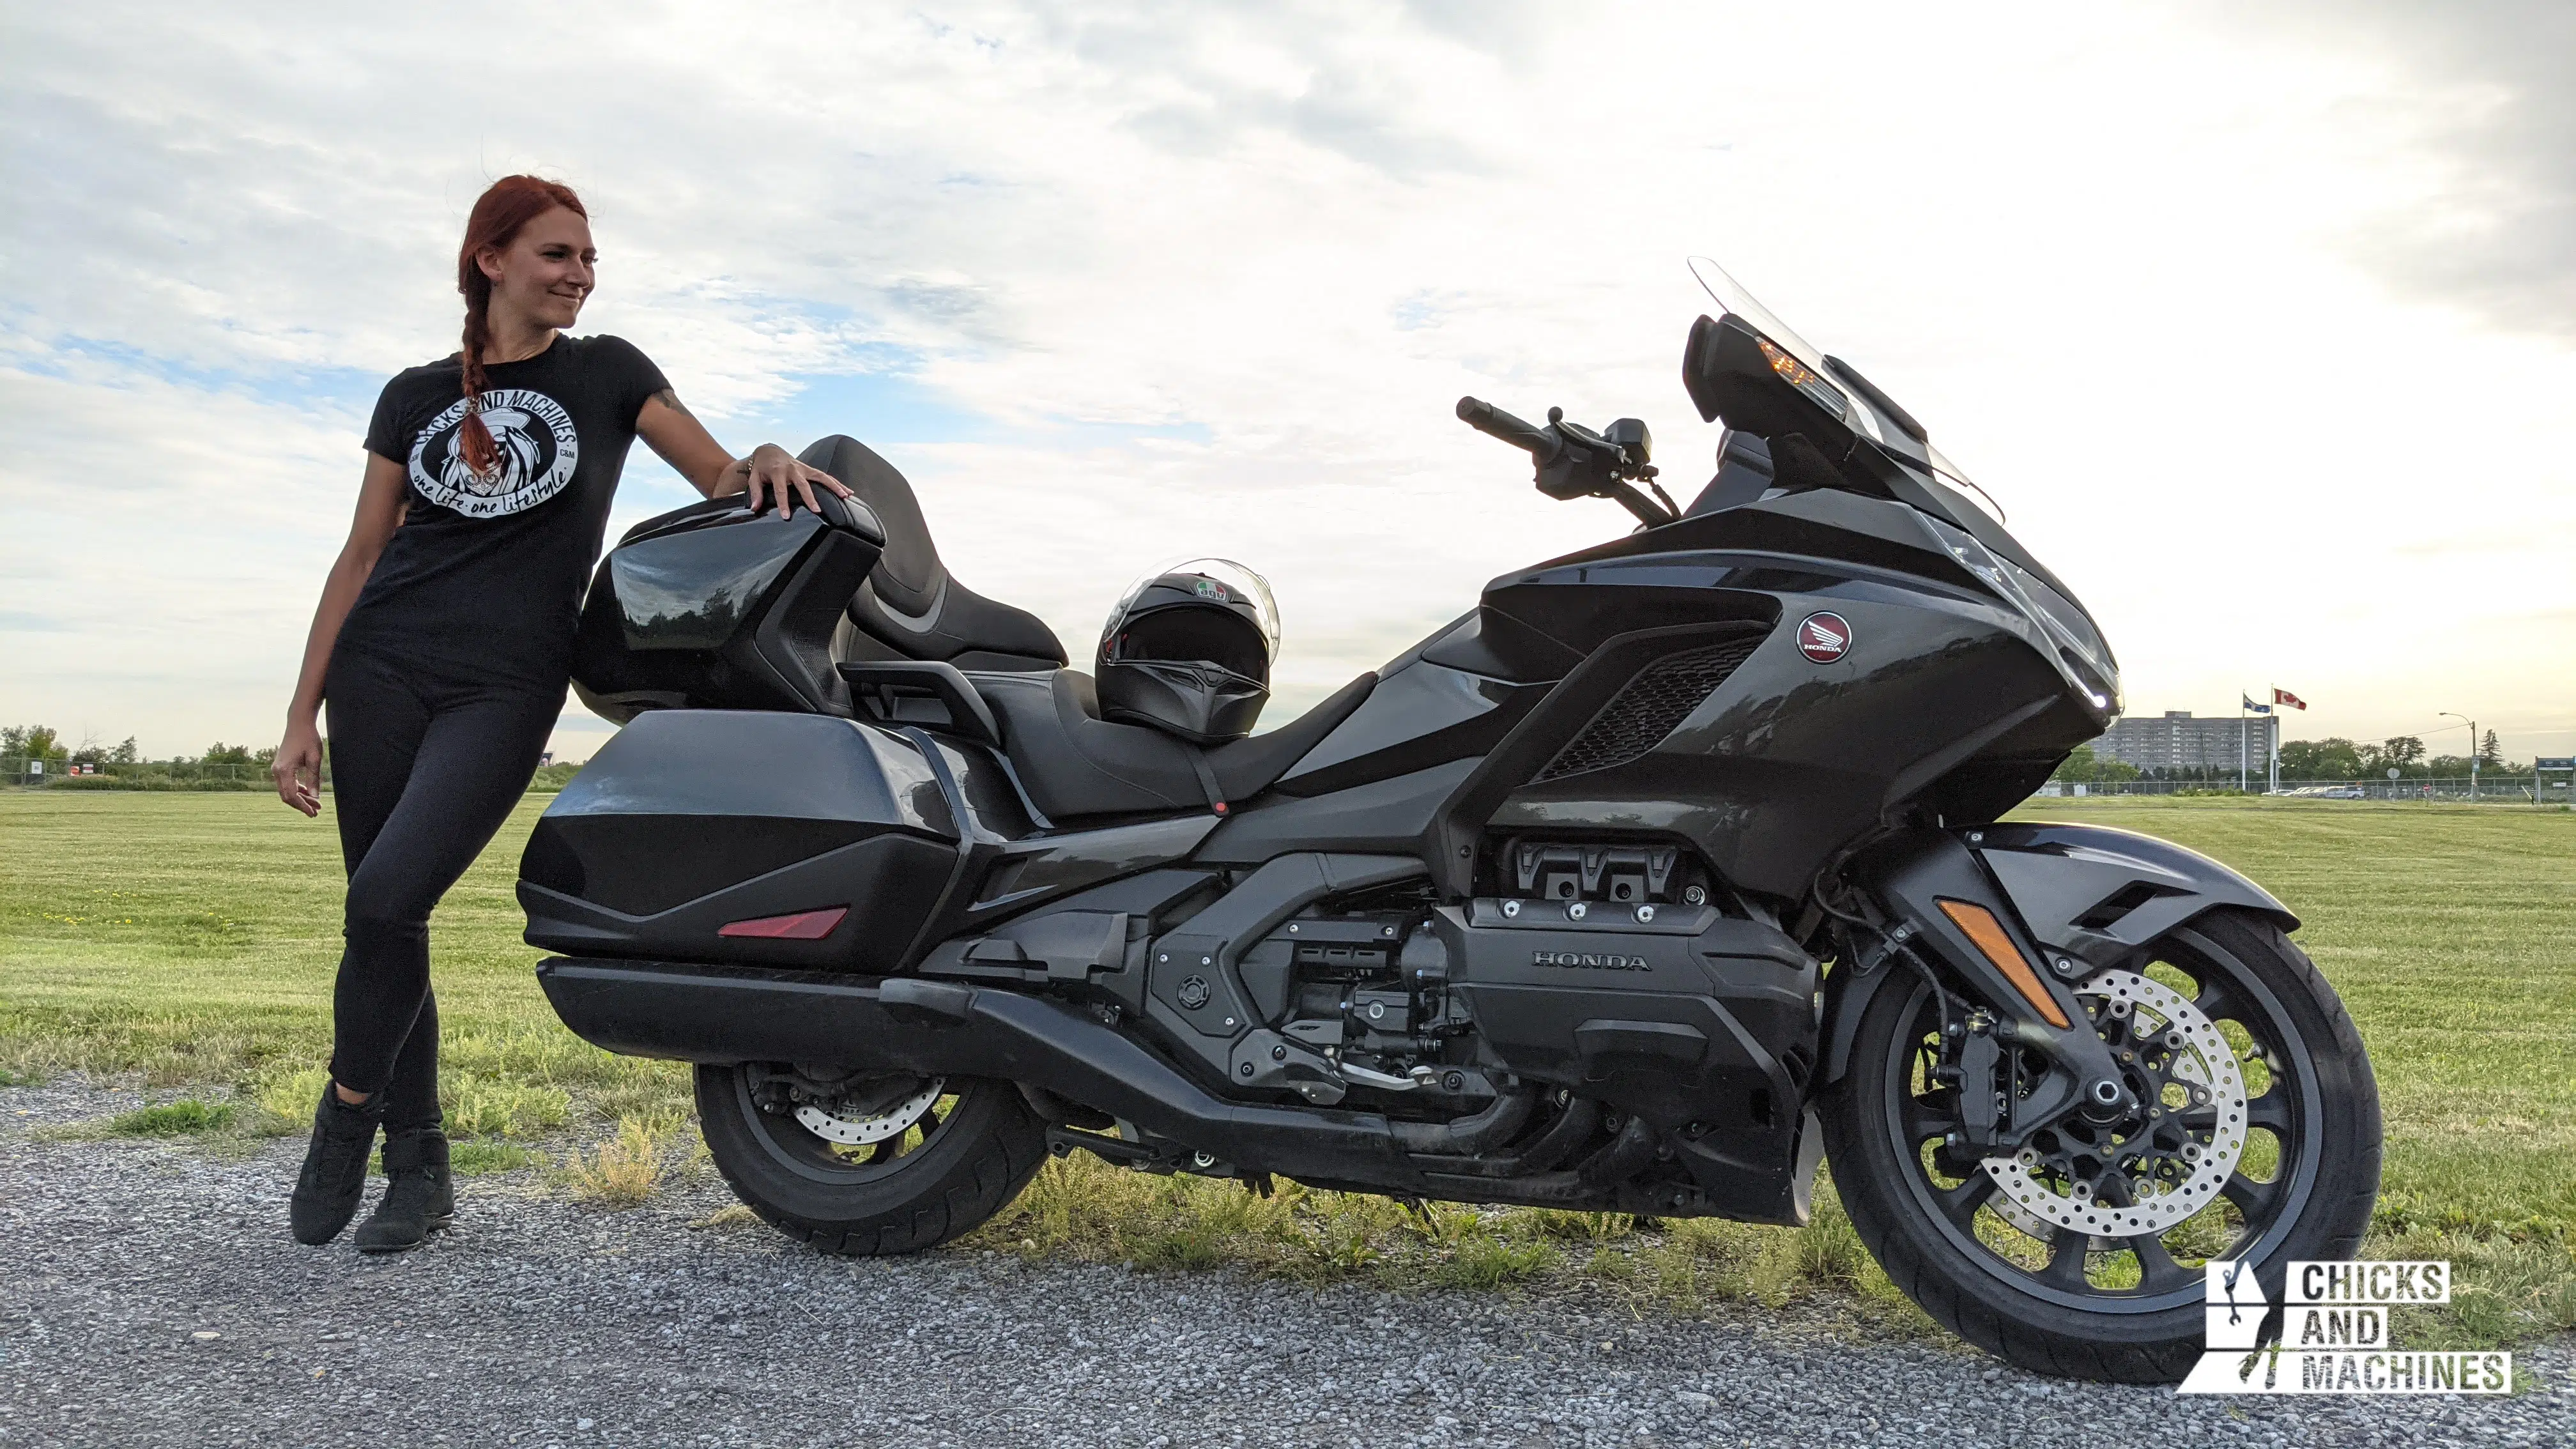 Caro was amazed by her test ride of the 2021 Honda Gold Wing Tour